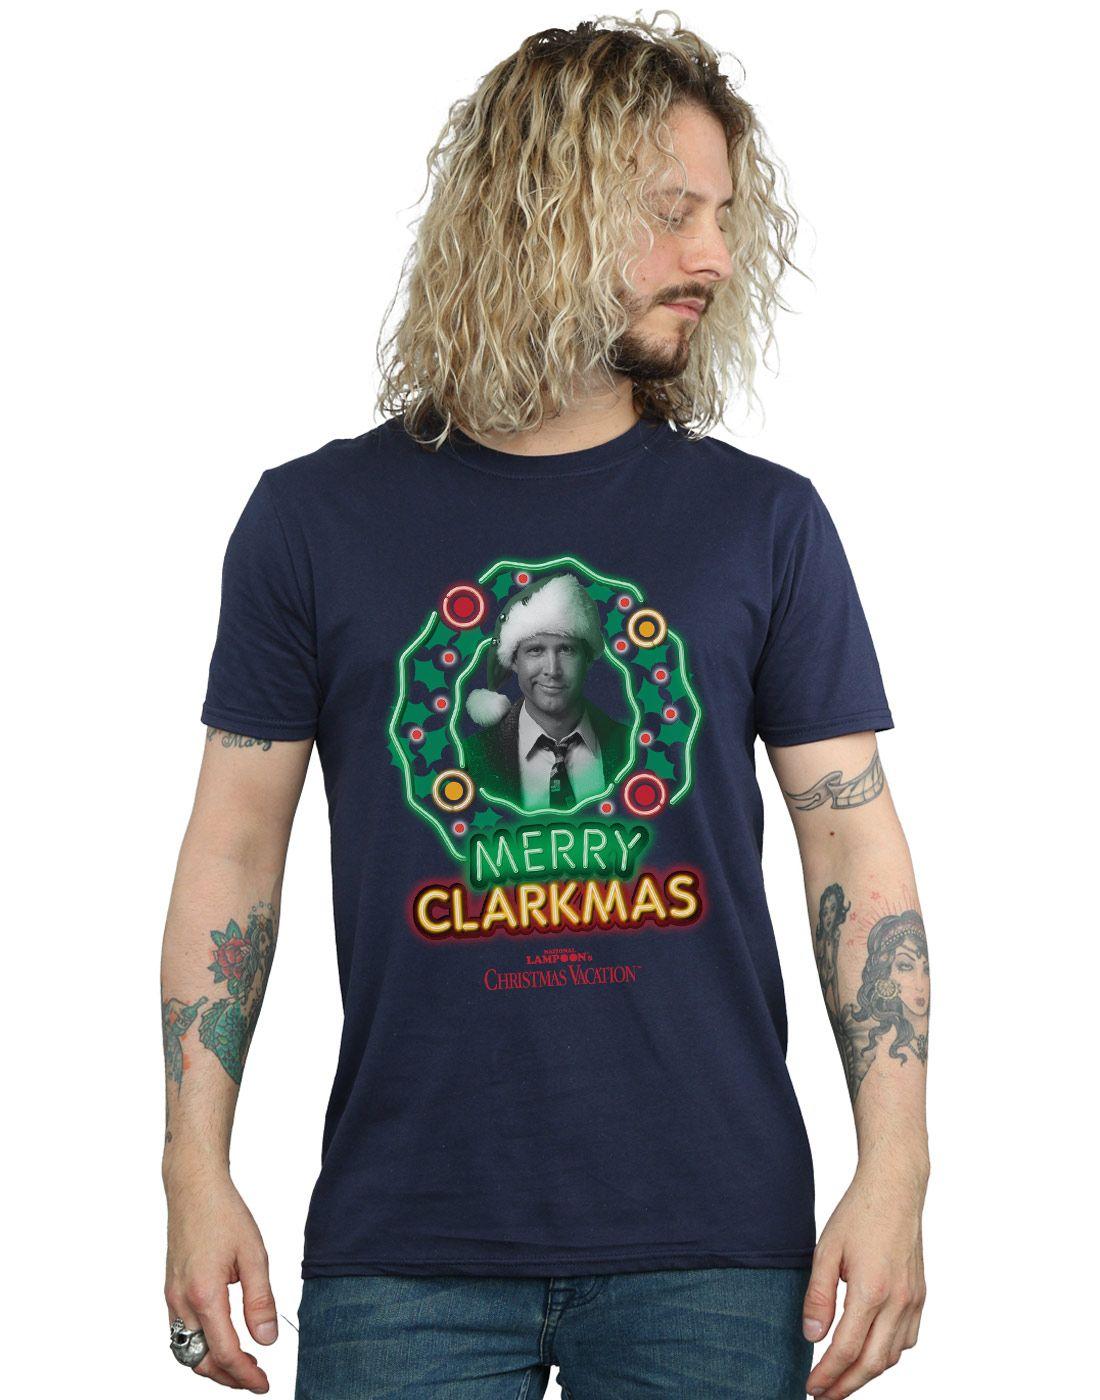 eBay Greyscale Logo - Details about National Lampoon's Christmas Vacation Men's Greyscale  Clarkmas T-Shirt